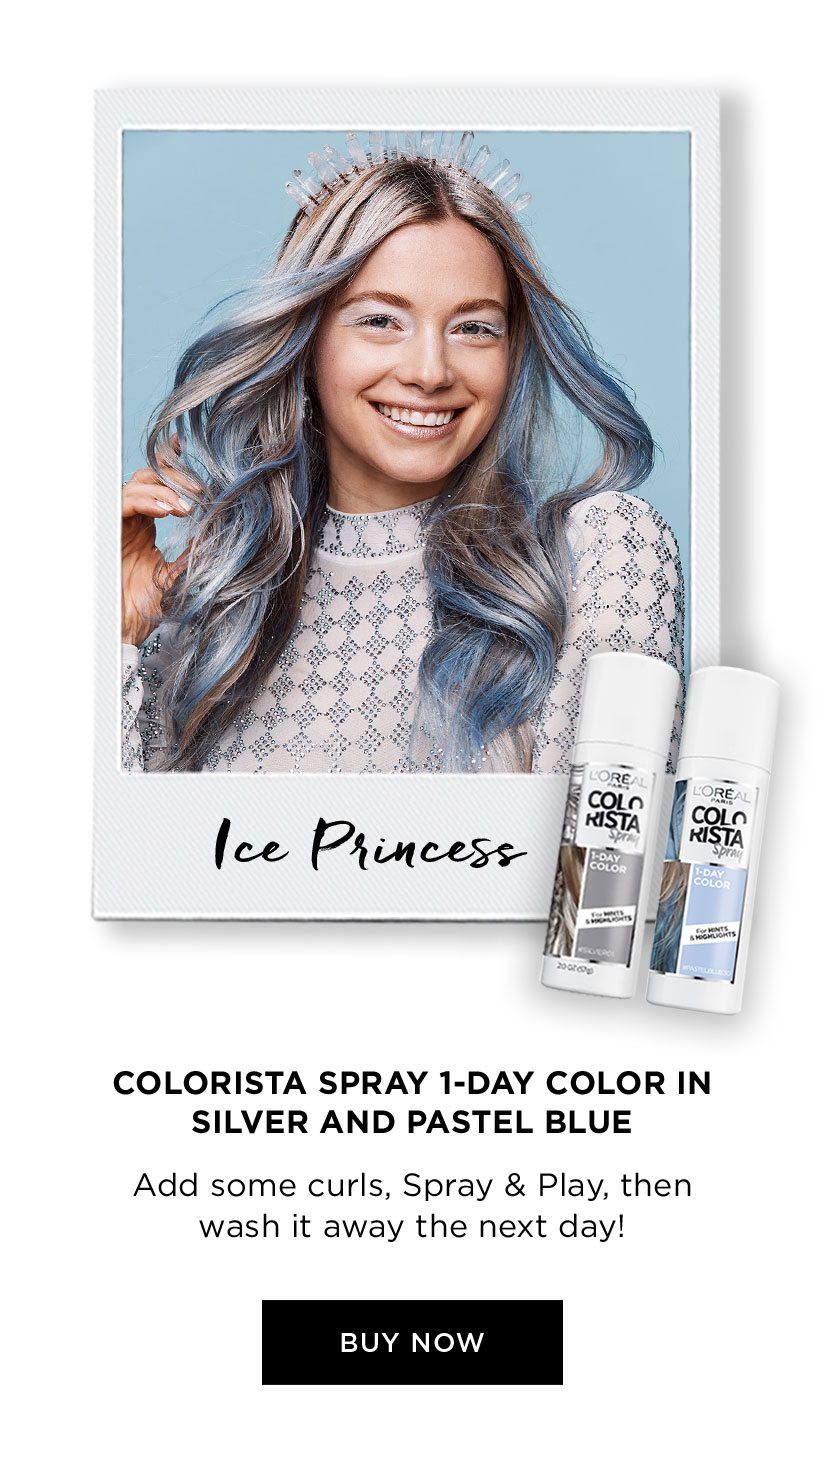 Ice Princess - COLORISTA SPRAY 1-DAY COLOR IN SILVER AND PASTEL BLUE - Add some curls, Spray & Play, then wash it away the next day! - BUY NOW